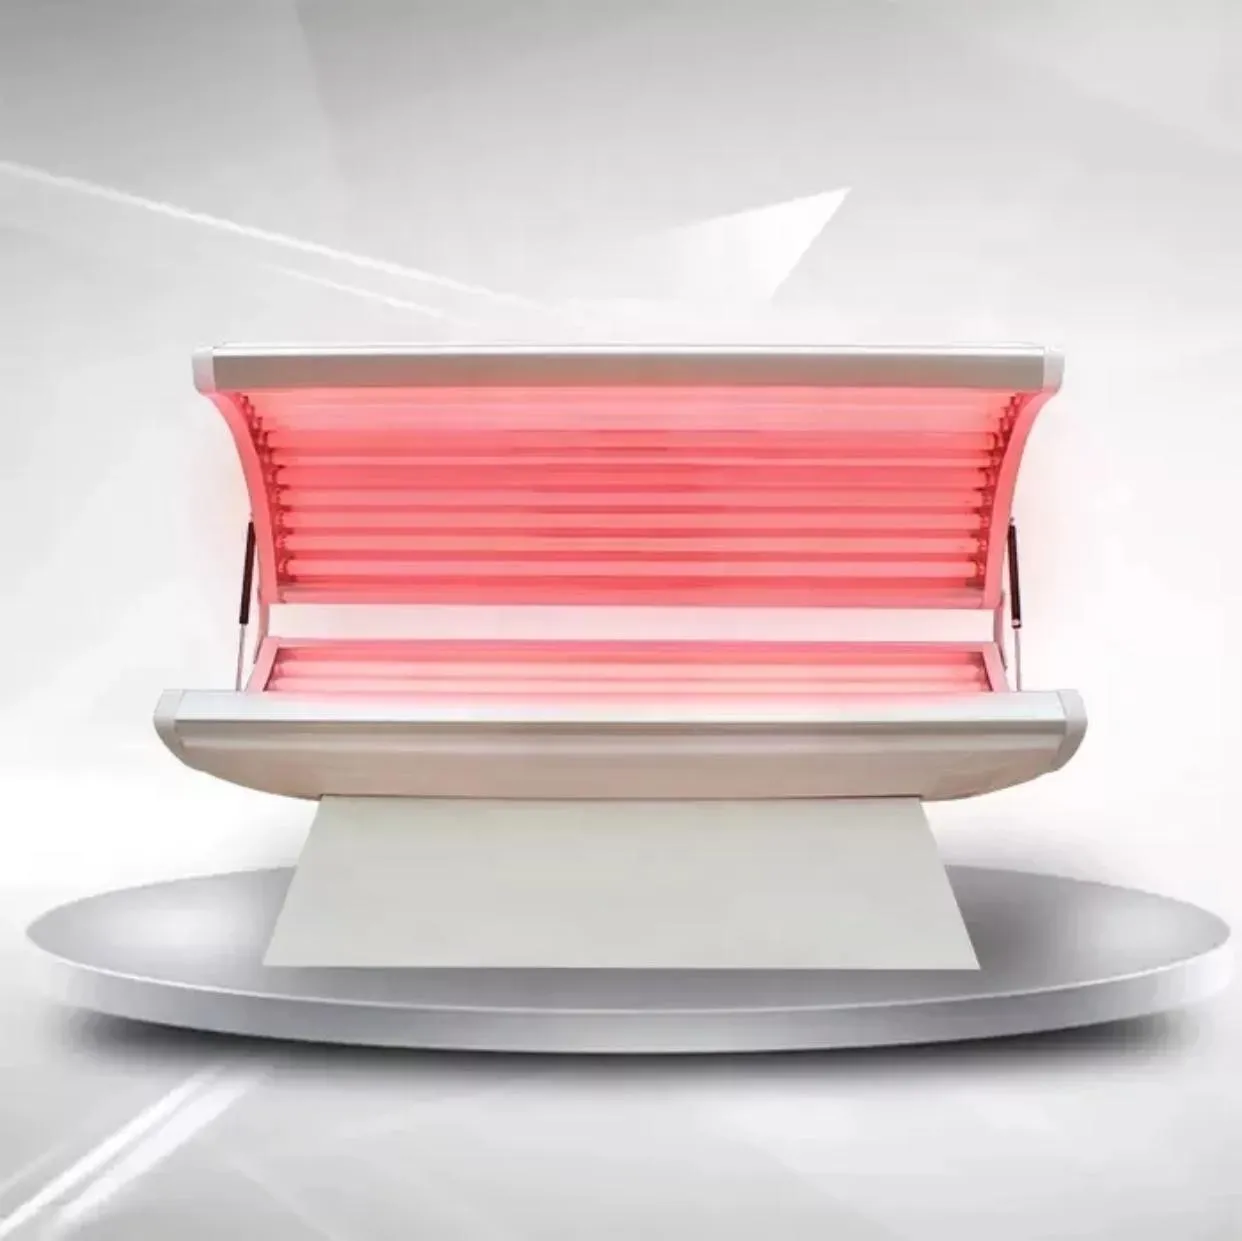 Newest Led Collagen Beauty Treatments Machines Skin Rejuvenation Red Light Therapy PDT Bed Machine For Beauty salon